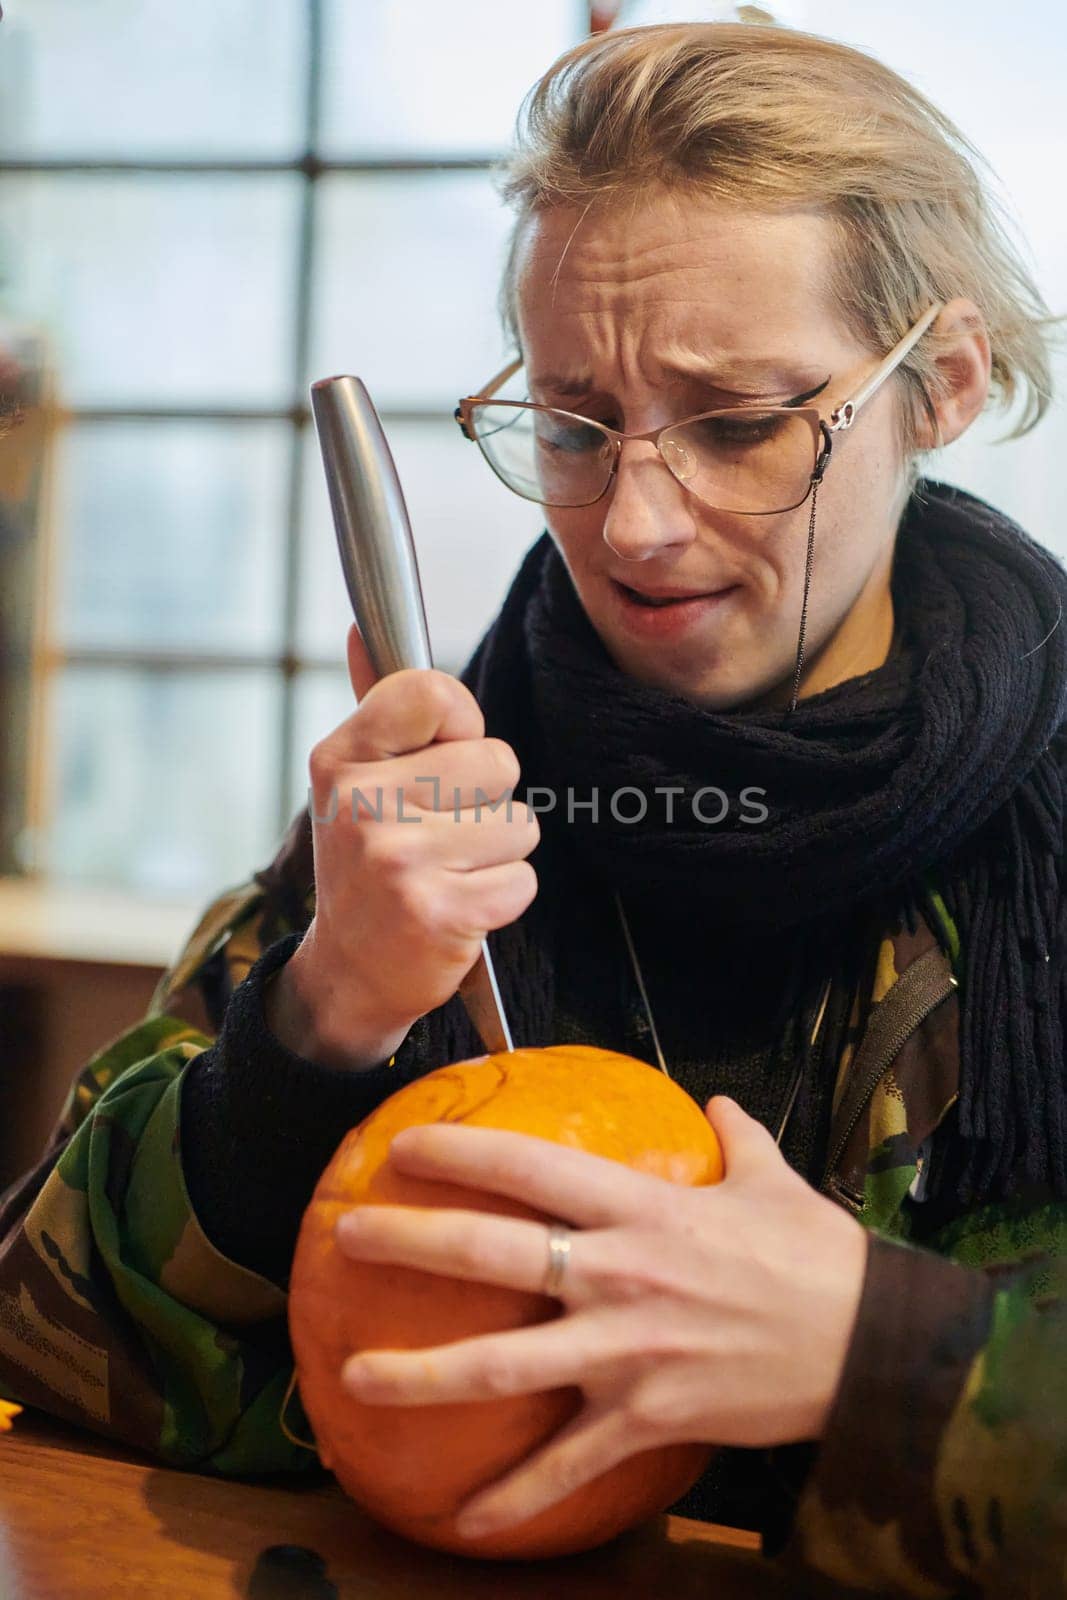 A modern blonde woman in military uniform is carving spooky pumpkins with a knife for Halloween night.